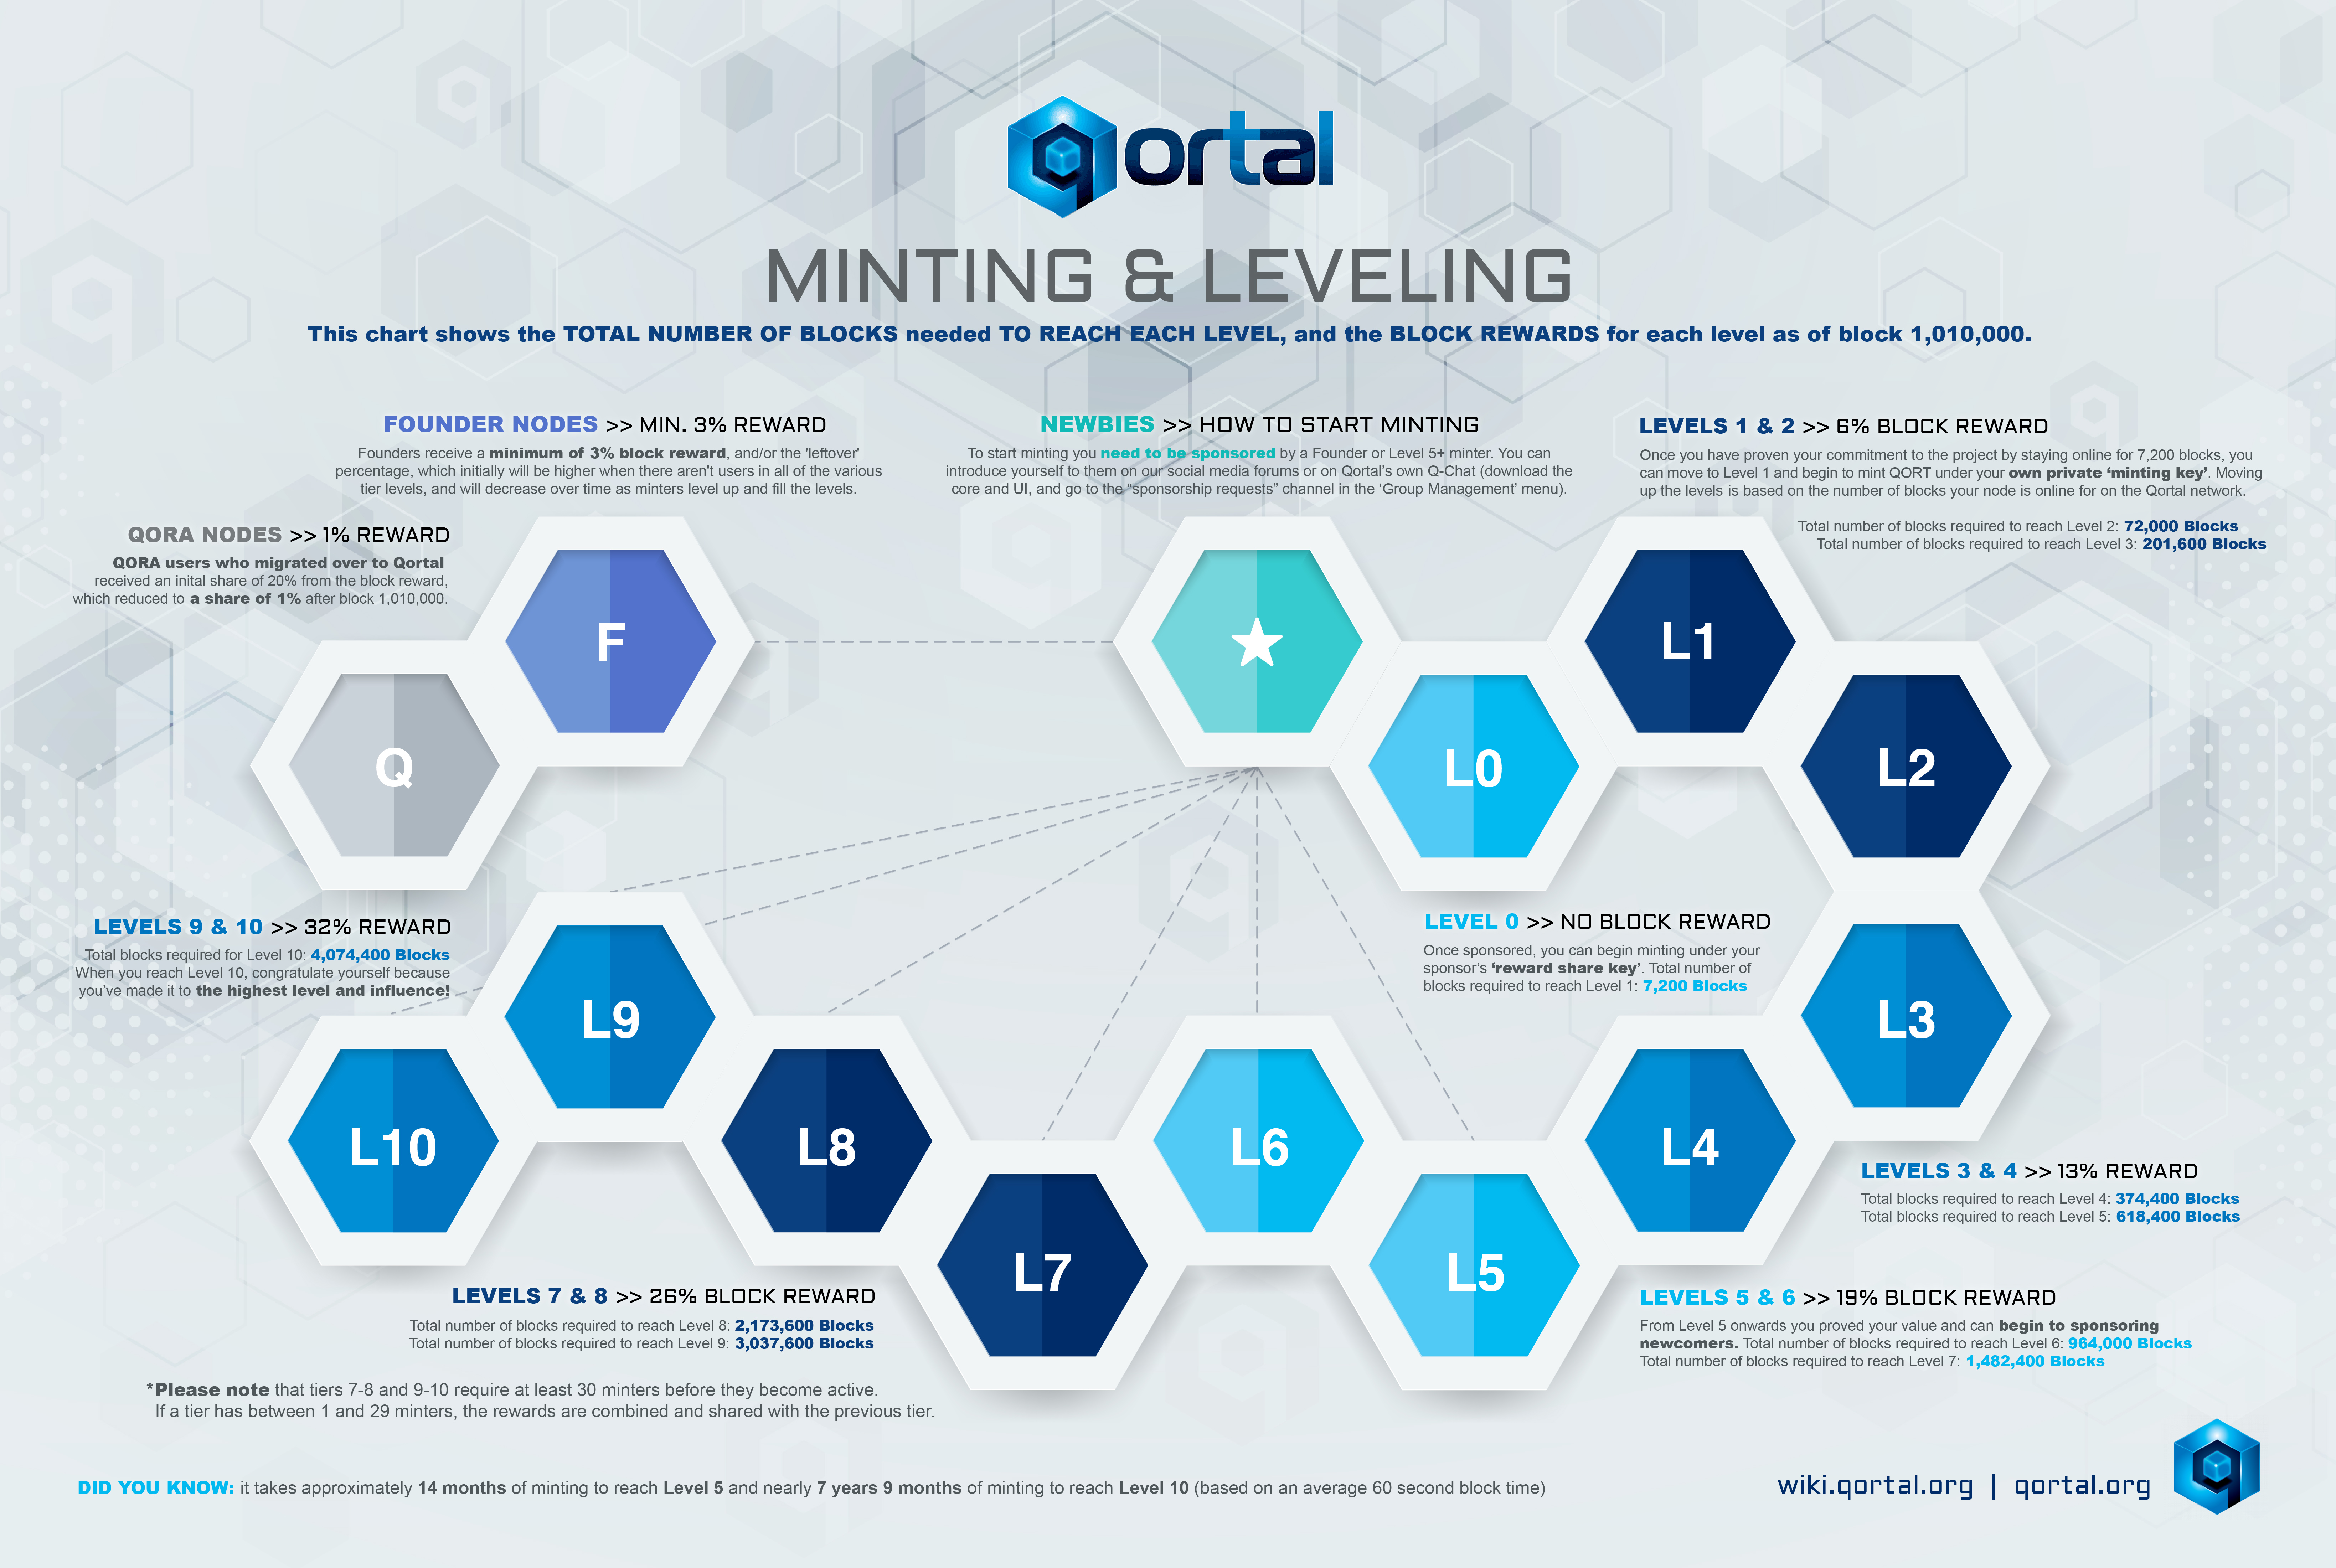 qortal_minting_and_leveling_2023.jpg